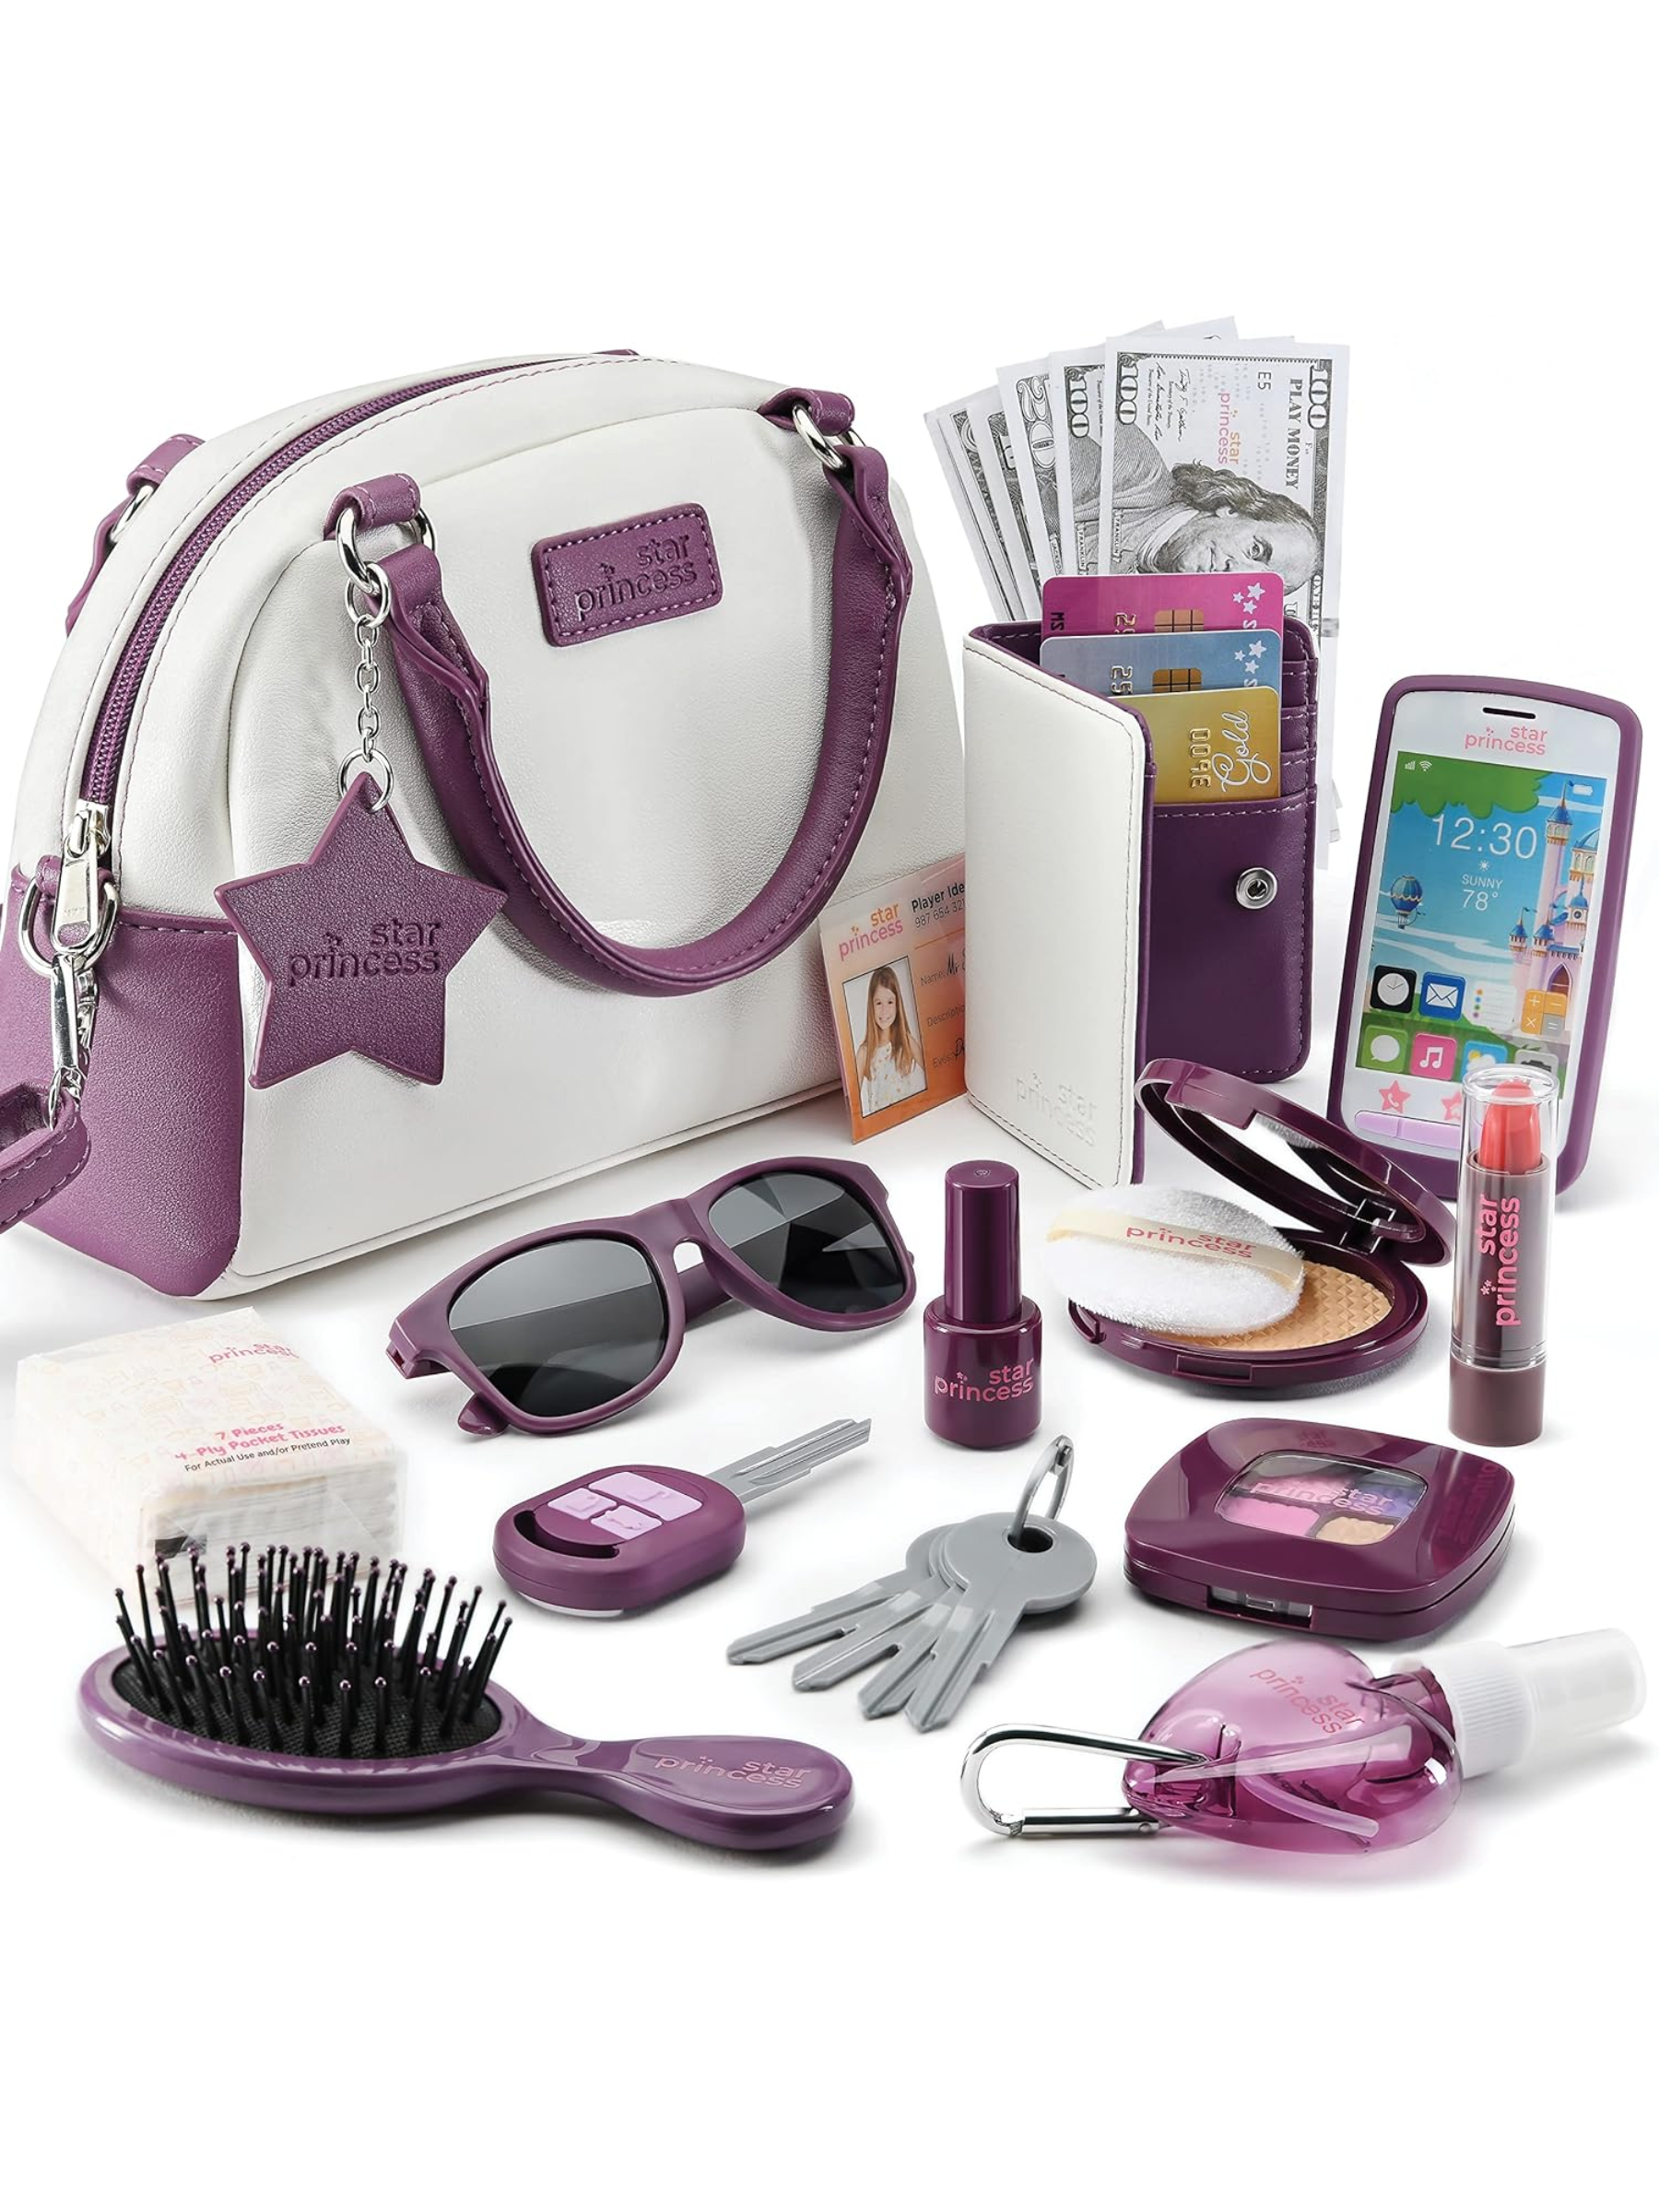 This pretend play set comes with everything a little girl could ever want. The adorable purse is packed with more than 30 accessories, including a phone, a set of keys, sunglasses, makeup, a wallet with pretend money, a pack of tissues, and even a bottle of hand sanitizer, to name a fraction of the goodies. At one, they’ll love simply taking everything out and putting it back in; as they grow, the possibilities for imaginative play are seemingly endless. <br> <br> <strong>What our expert says:</strong> “This purse was so much fun for my (then) one-year-old to unbox. She took her time pulling out each item and checking it out. Two years later, and this is still one of her absolute favorites… now she really knows how to use it for pretend play!” — Earley $29, Amazon. <a href="https://www.amazon.com/Little-Accessories-Pretend-Makeup-Toddlers/dp/B0BJYRT9JL?">Get it now!</a><p>Sign up for today’s biggest stories, from pop culture to politics.</p><a href="https://www.glamour.com/newsletter/news?sourceCode=msnsend">Sign Up</a>